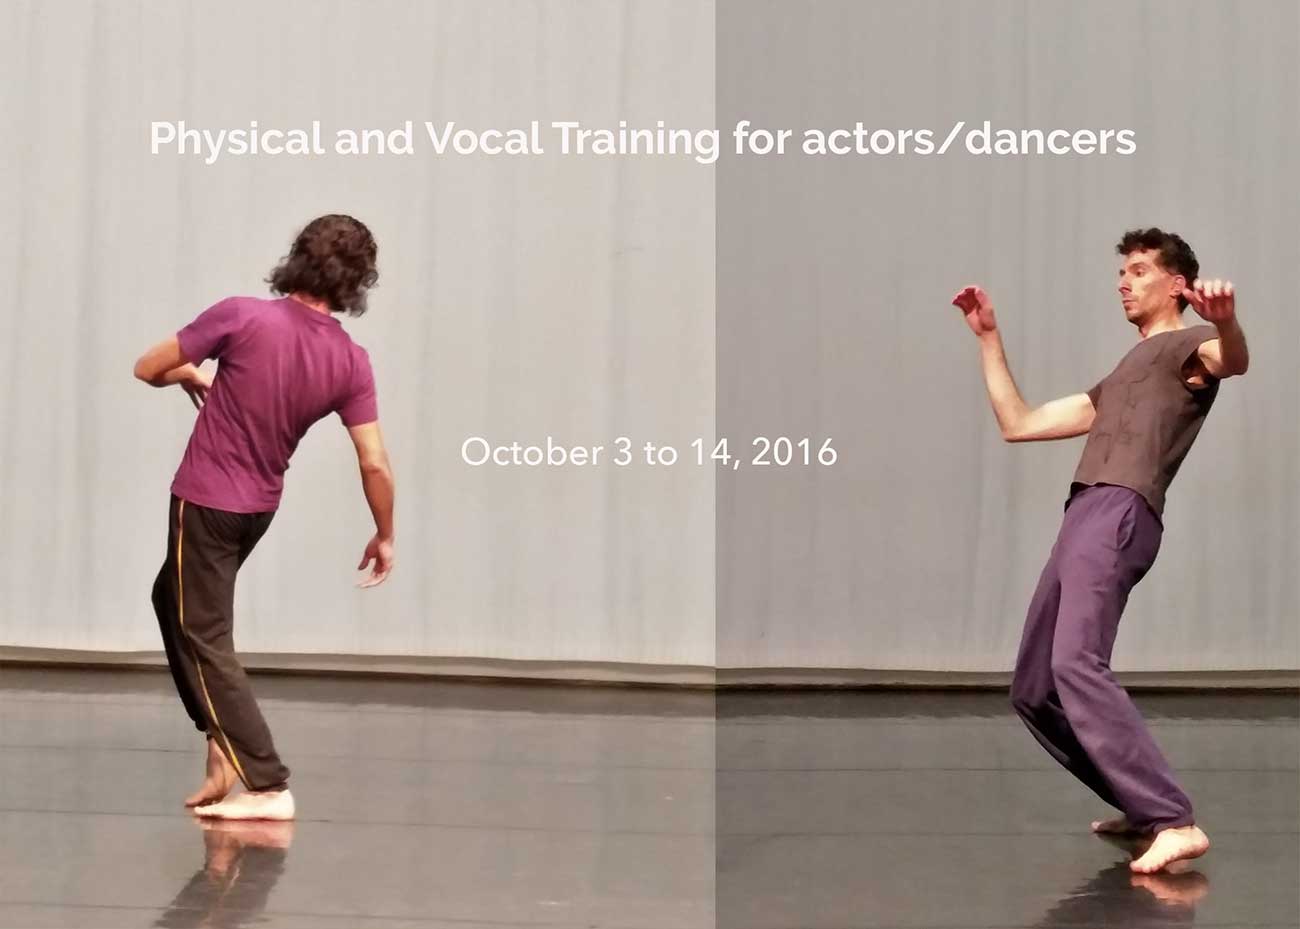 Physical and Vocal Training for actors/dancers